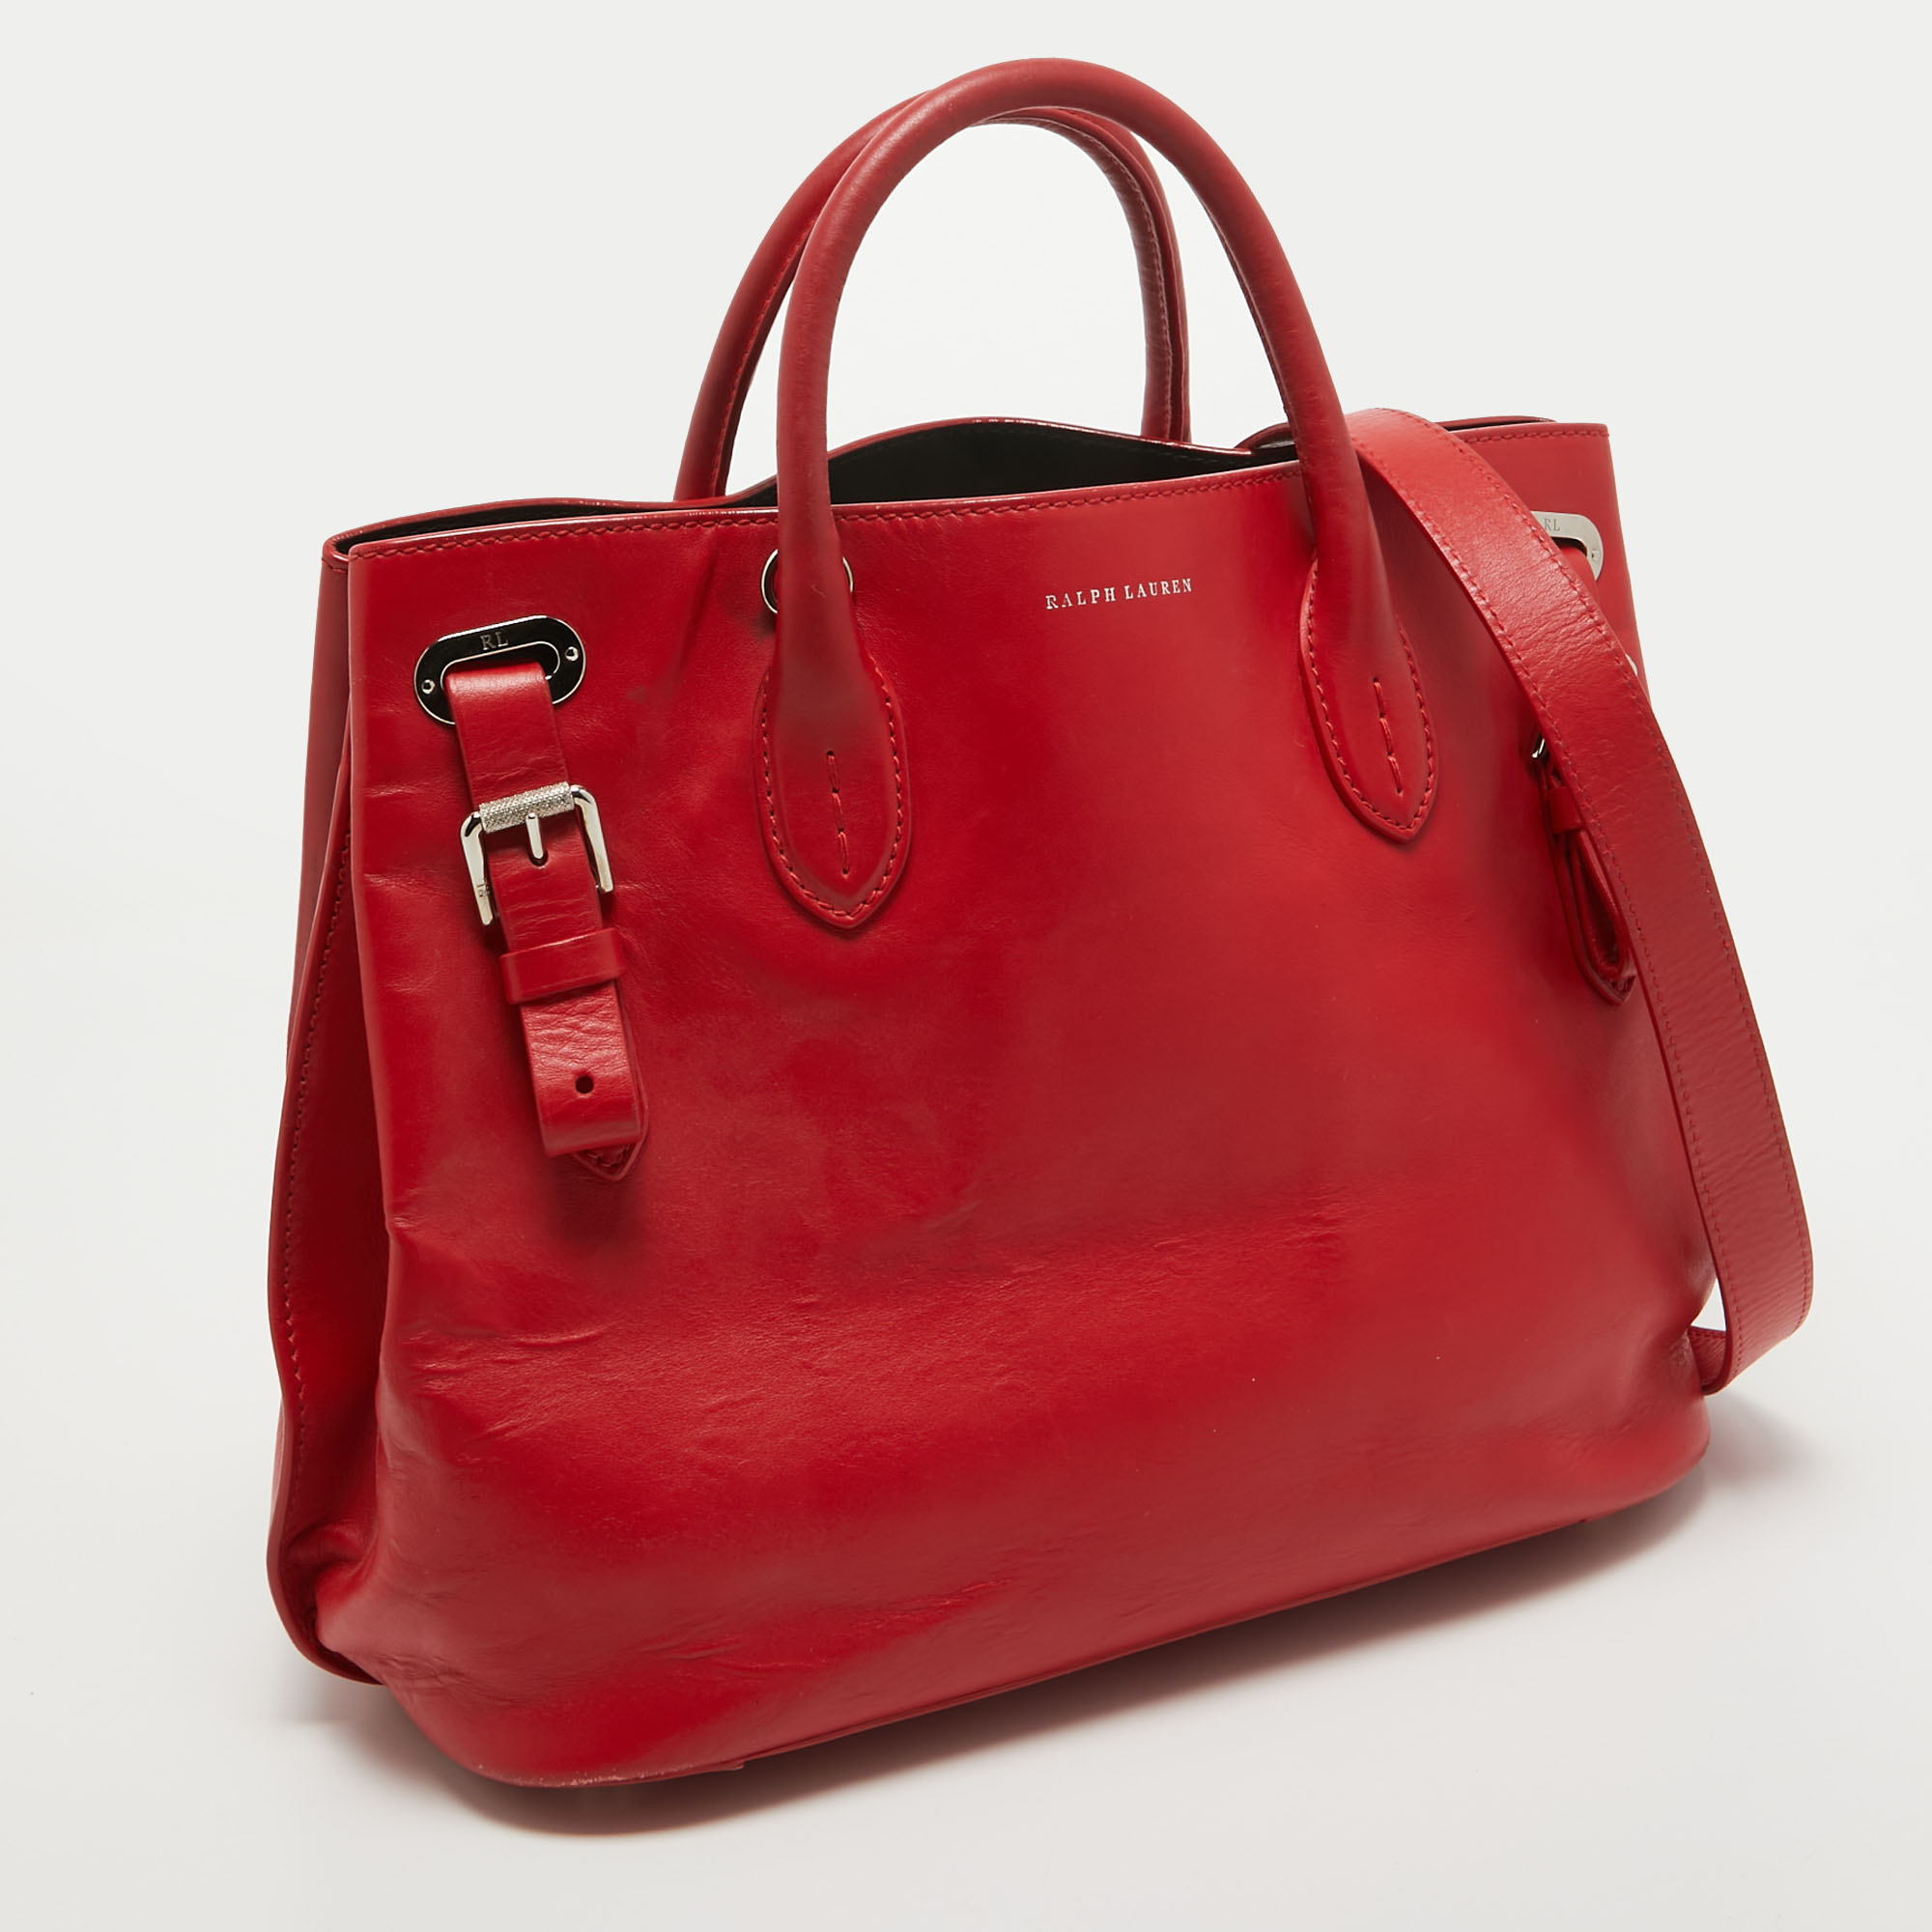 Ralph Lauren Red Leather Tote